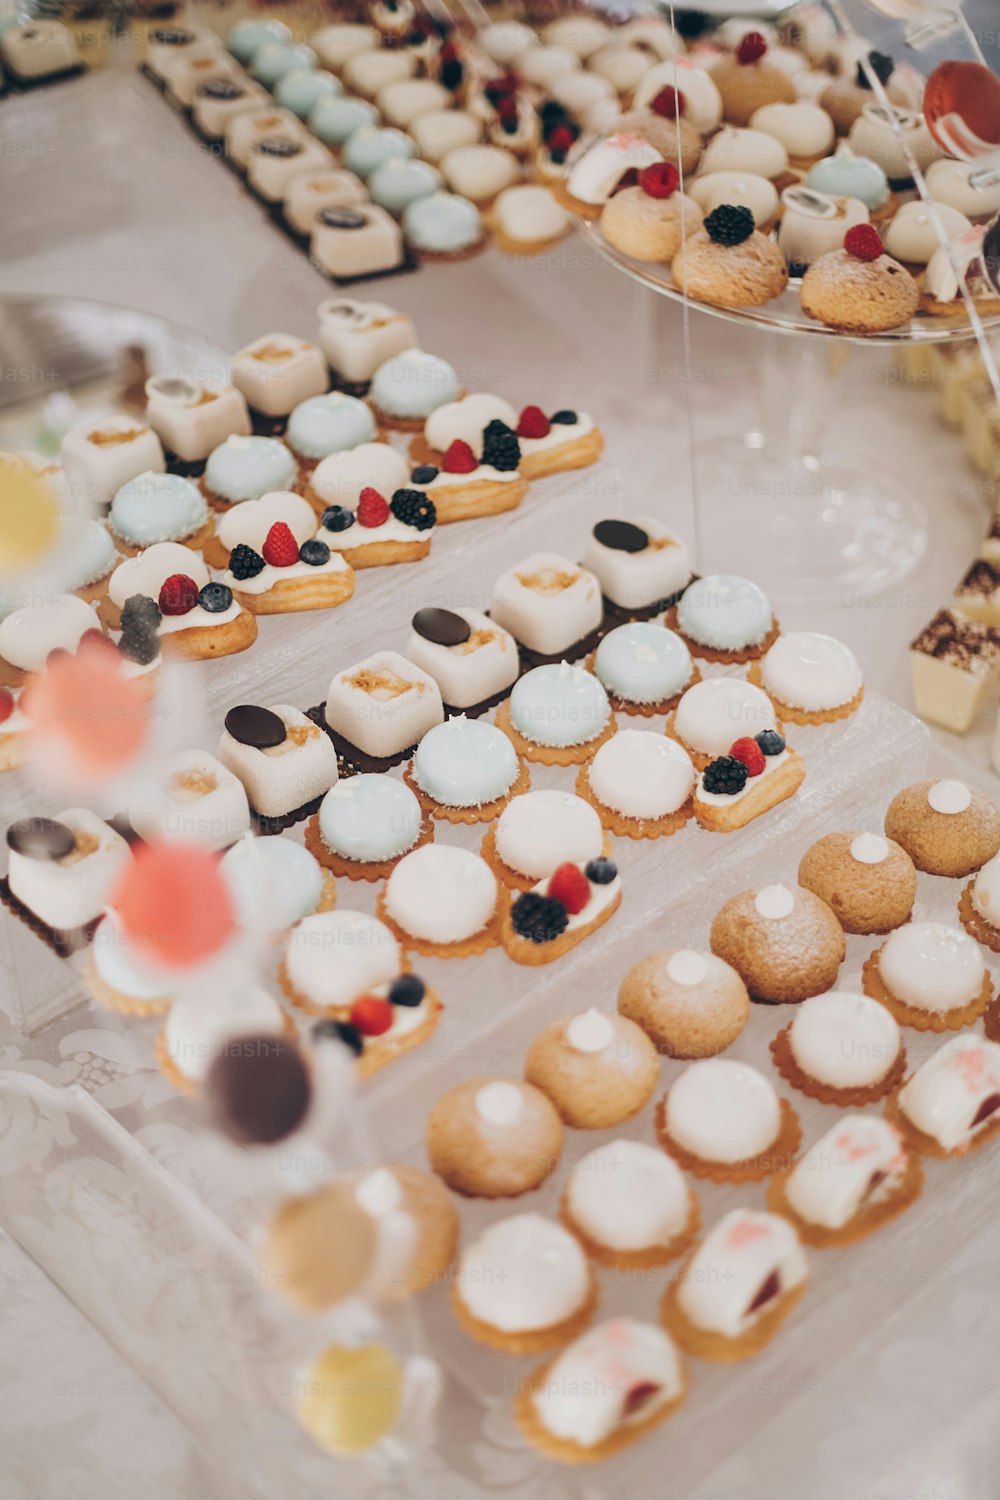 Delicious creamy desserts with fruits, macarons, cakes and cookies on table at wedding reception in restaurant. Luxury catering service. Wedding candy bar.